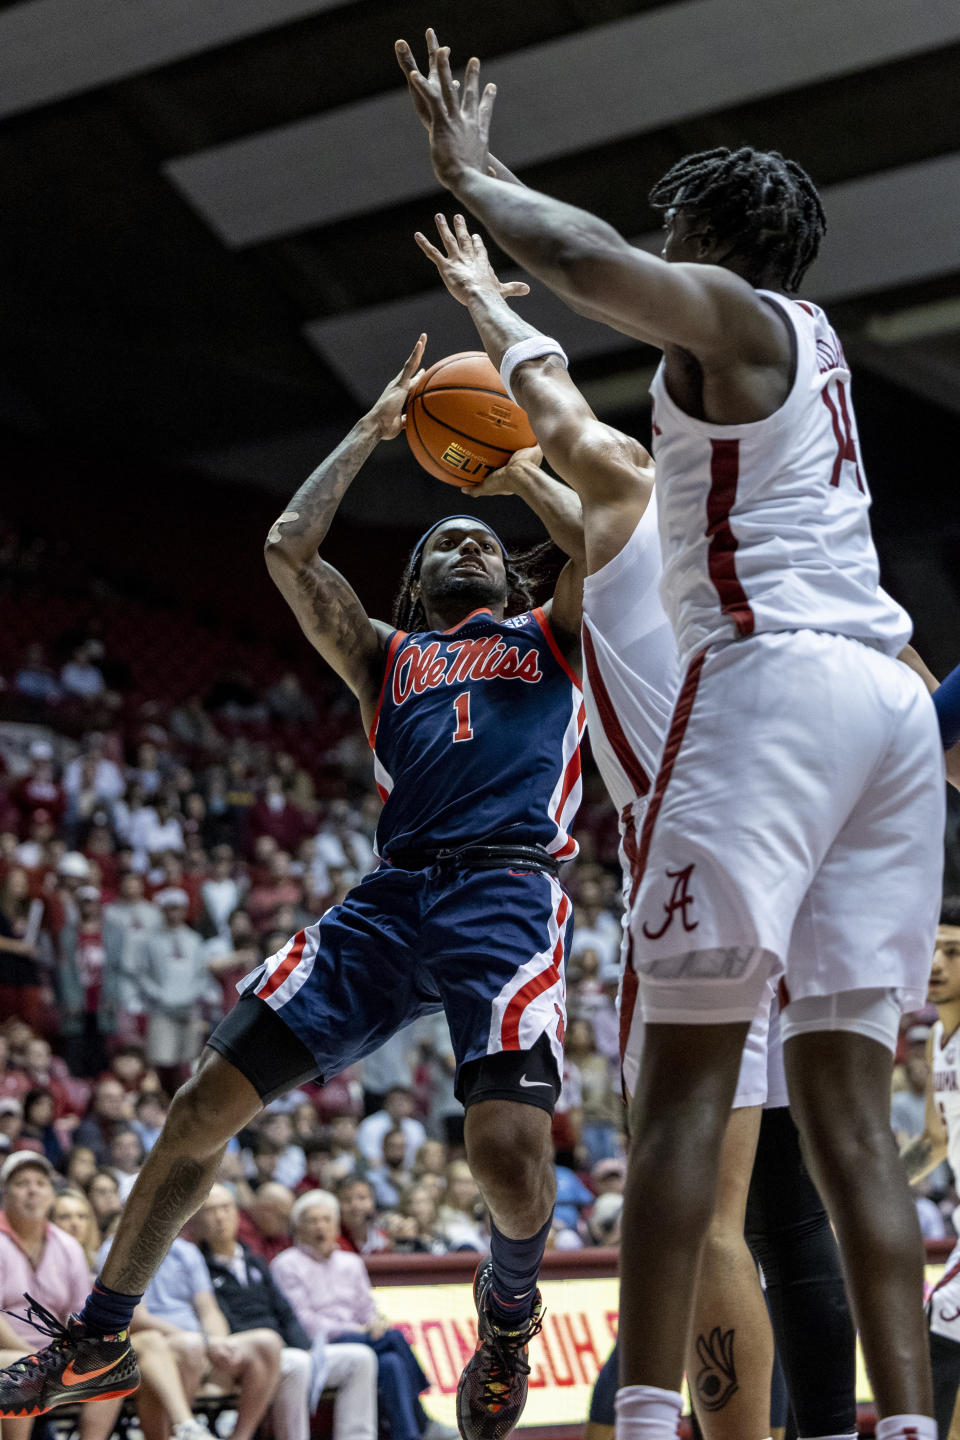 Mississippi guard Amaree Abram (1) shoots against Alabama during the first half of an NCAA college basketball game, Tuesday, Jan. 3, 2023, in Tuscaloosa, Ala. (AP Photo/Vasha Hunt)